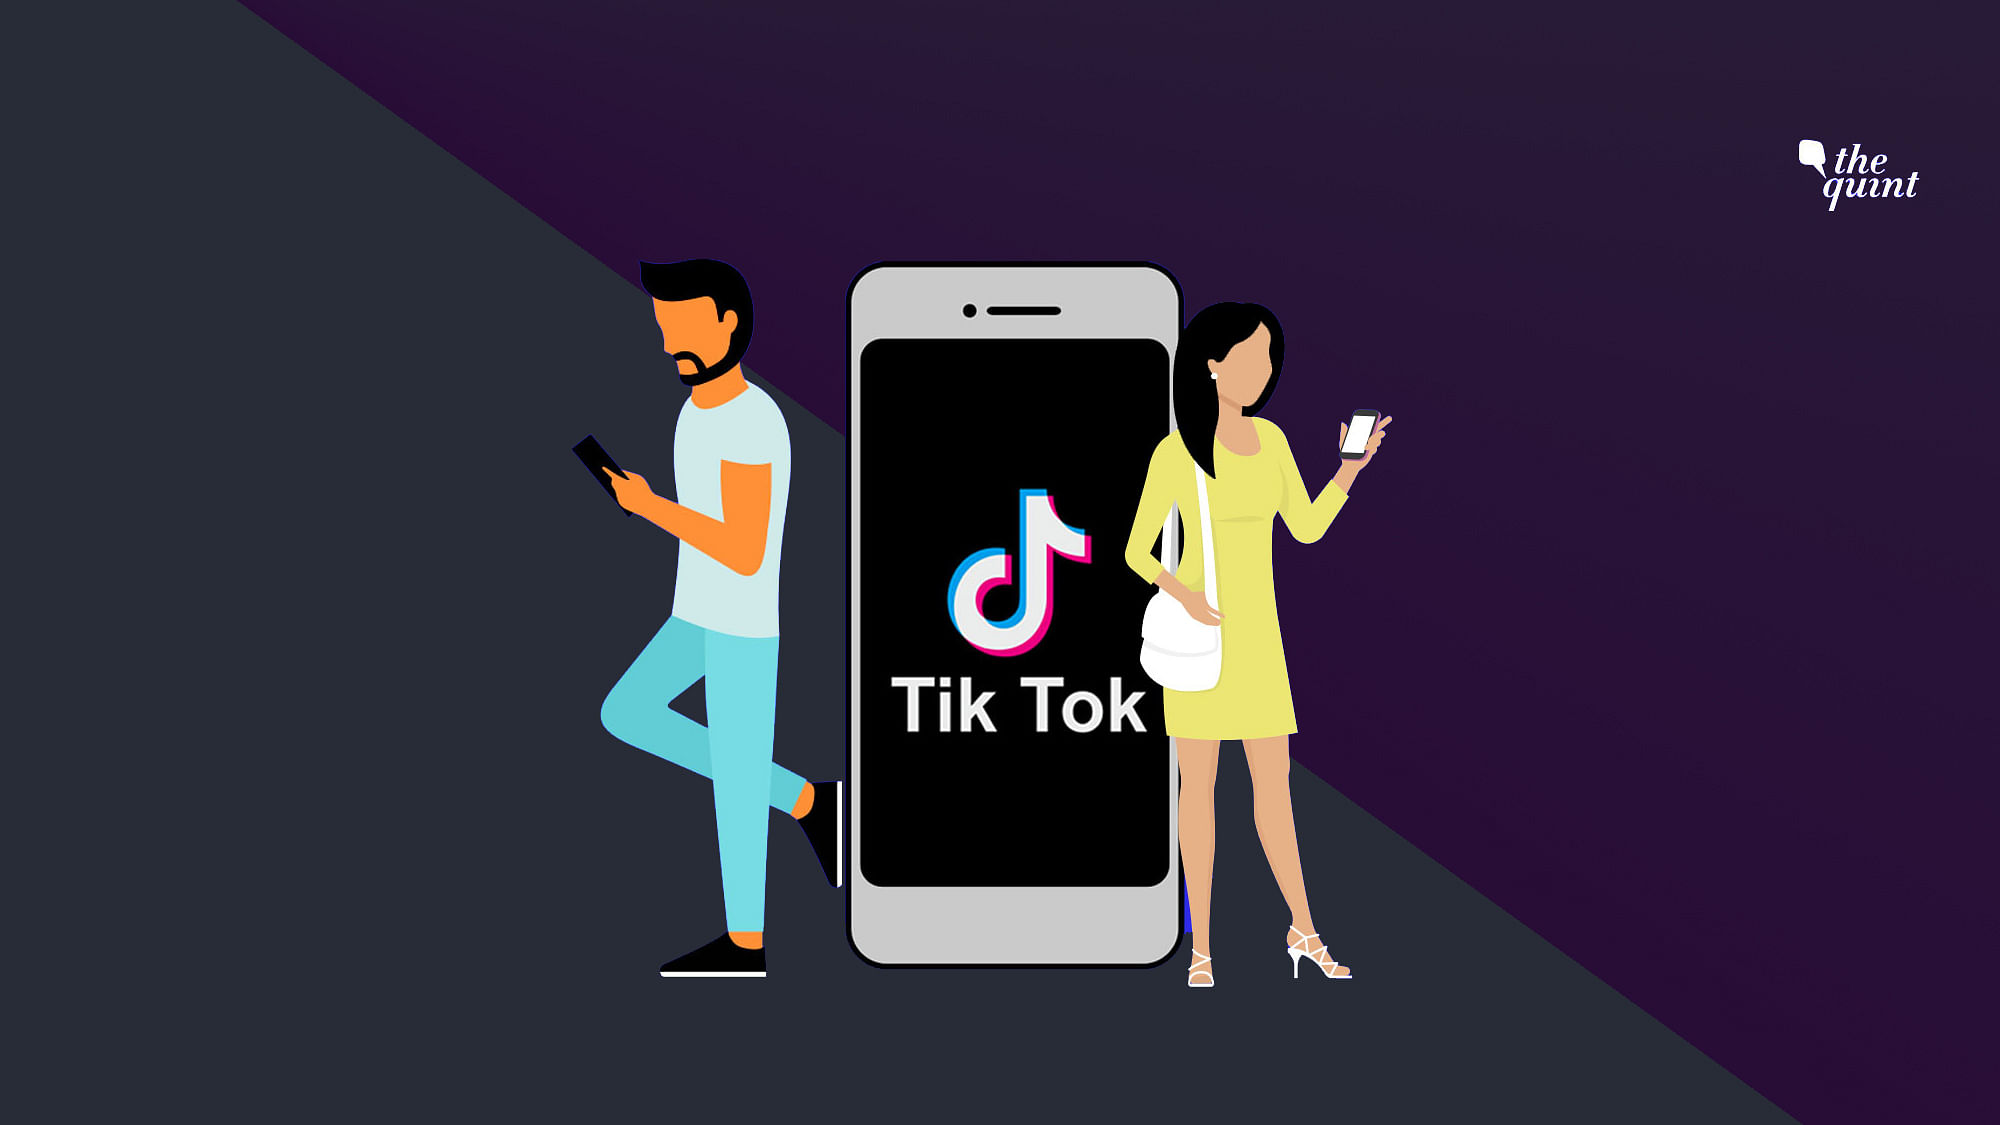 TikTok is a big hit in India.